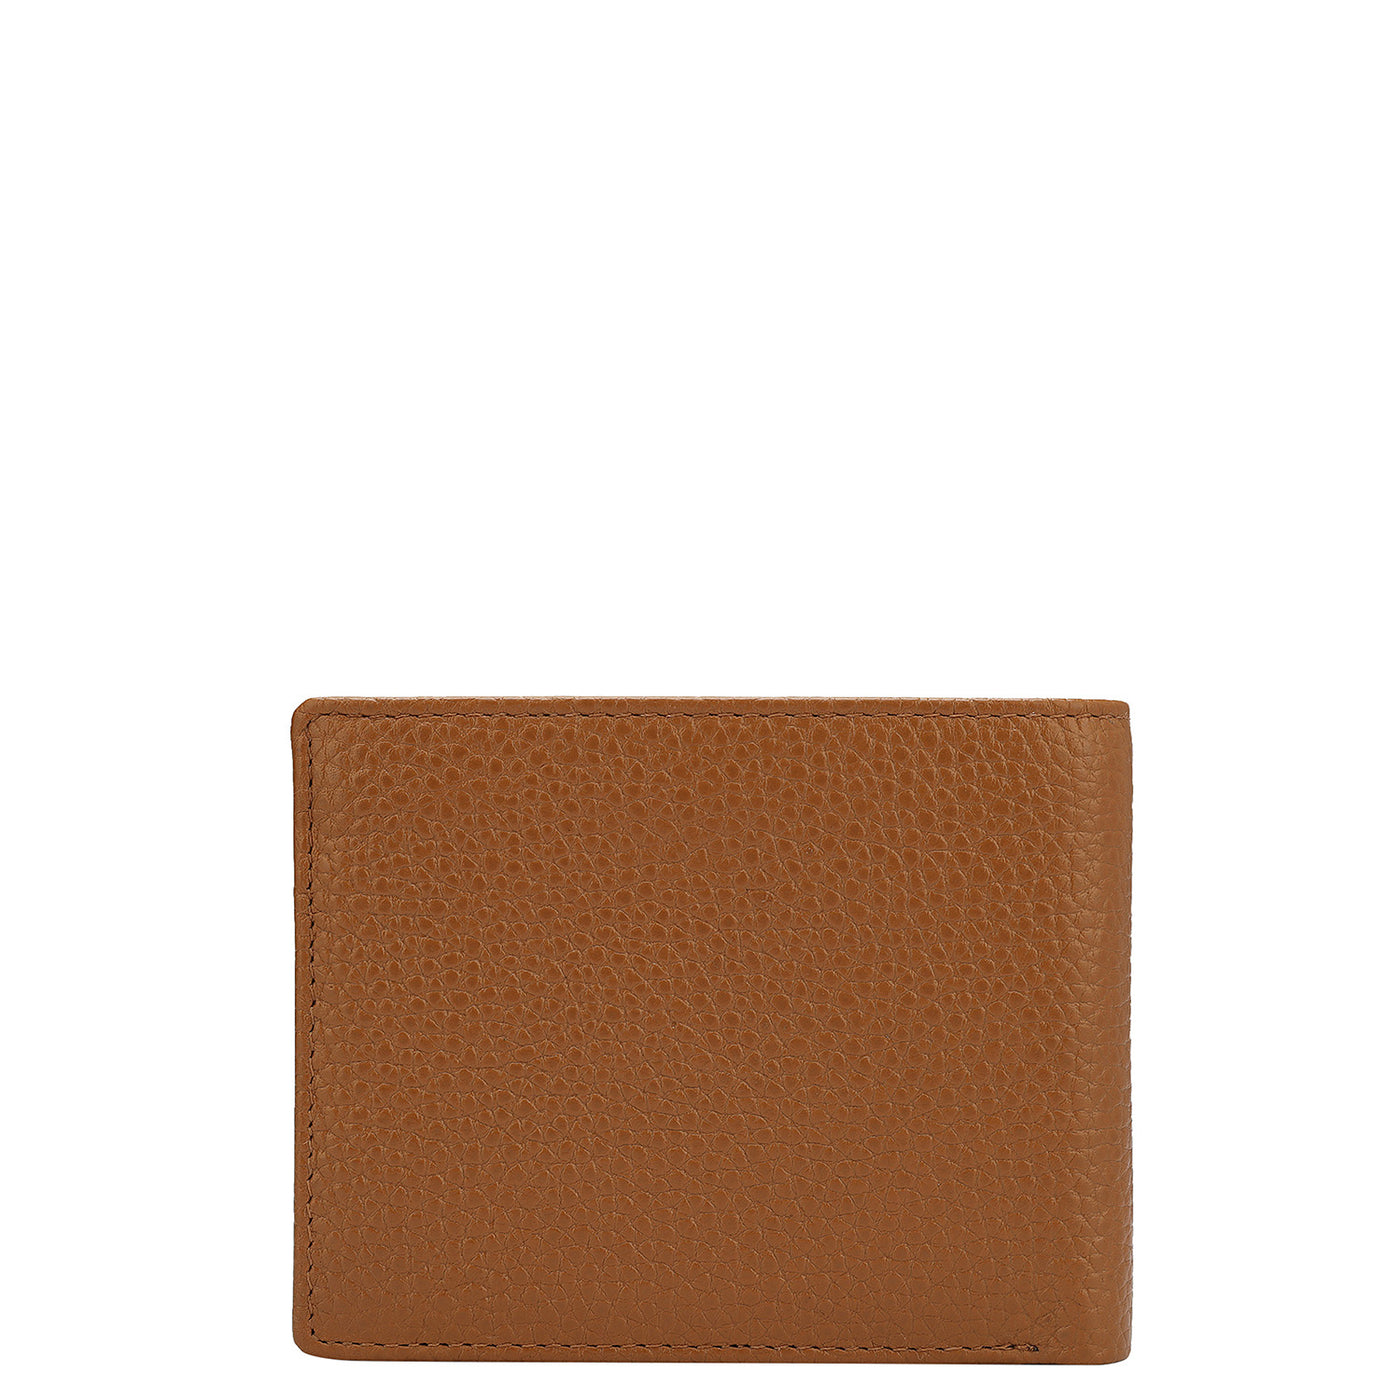 Wax Leather Mens Wallet - Tan